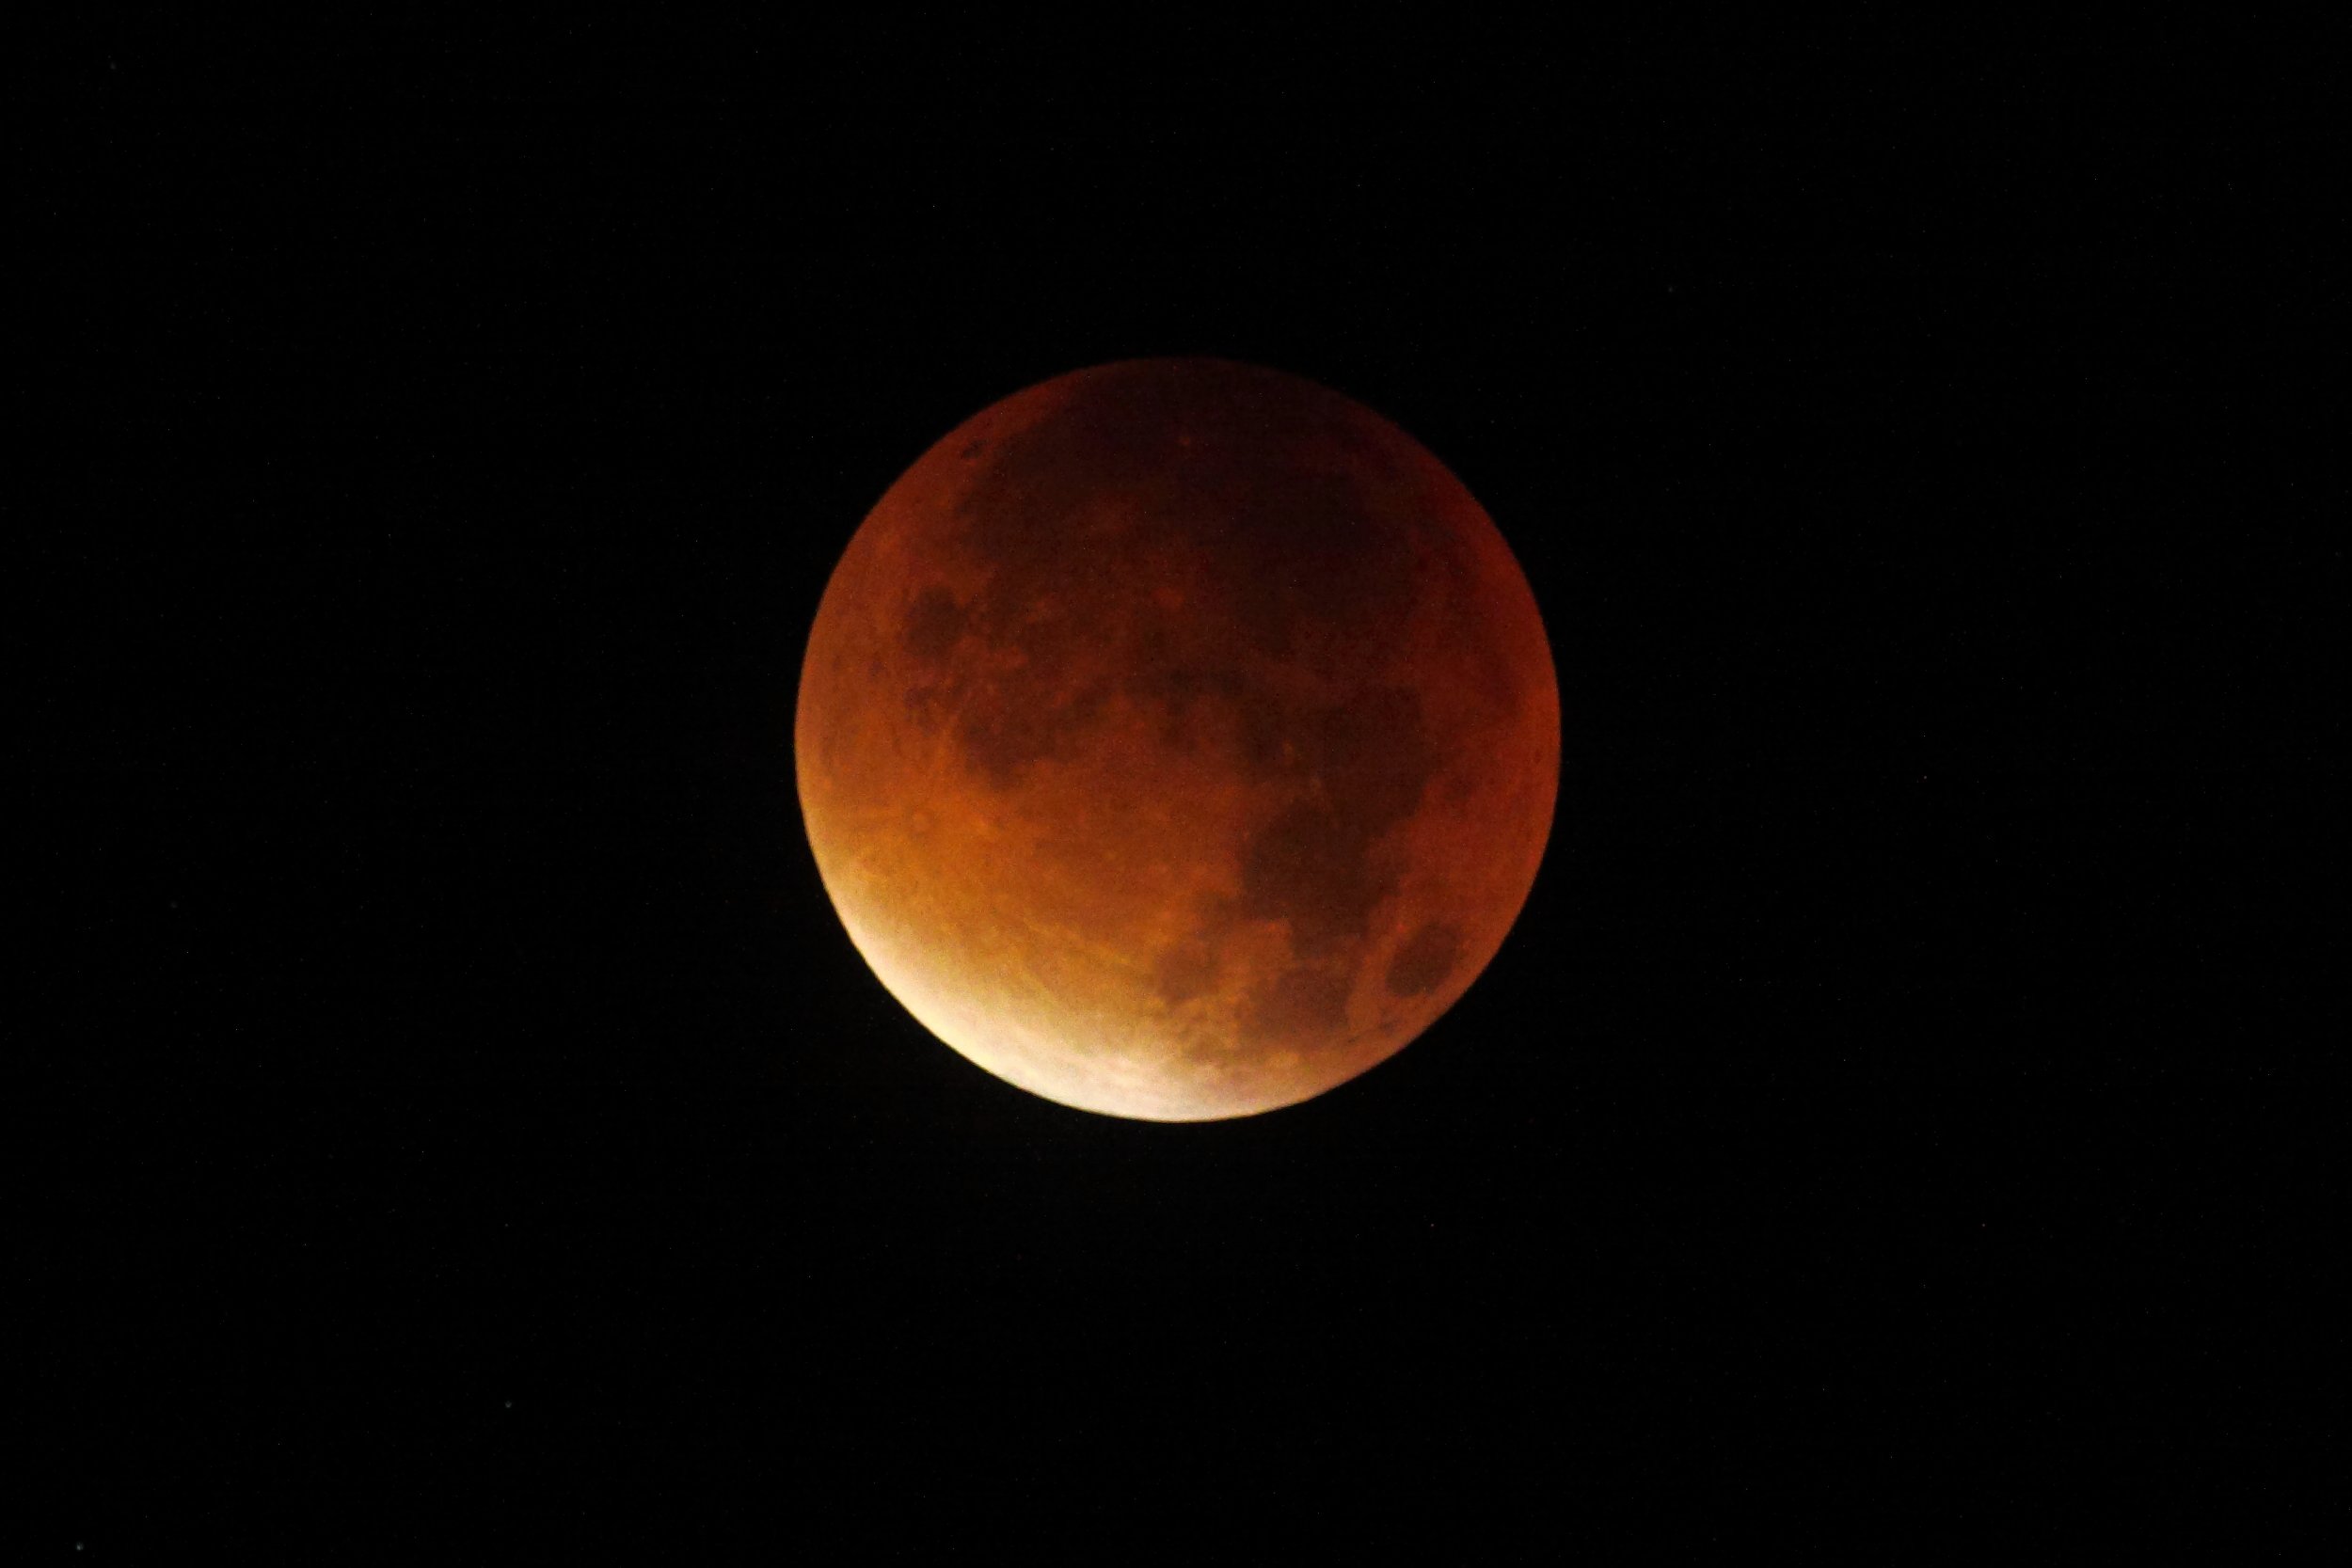 Total moon eclipse photographed in september 28, 2015 by Stefano Dal Mas from Portogruaro (Ve): 179 KB; click on the image to enlarge at 2500x1667 pixels